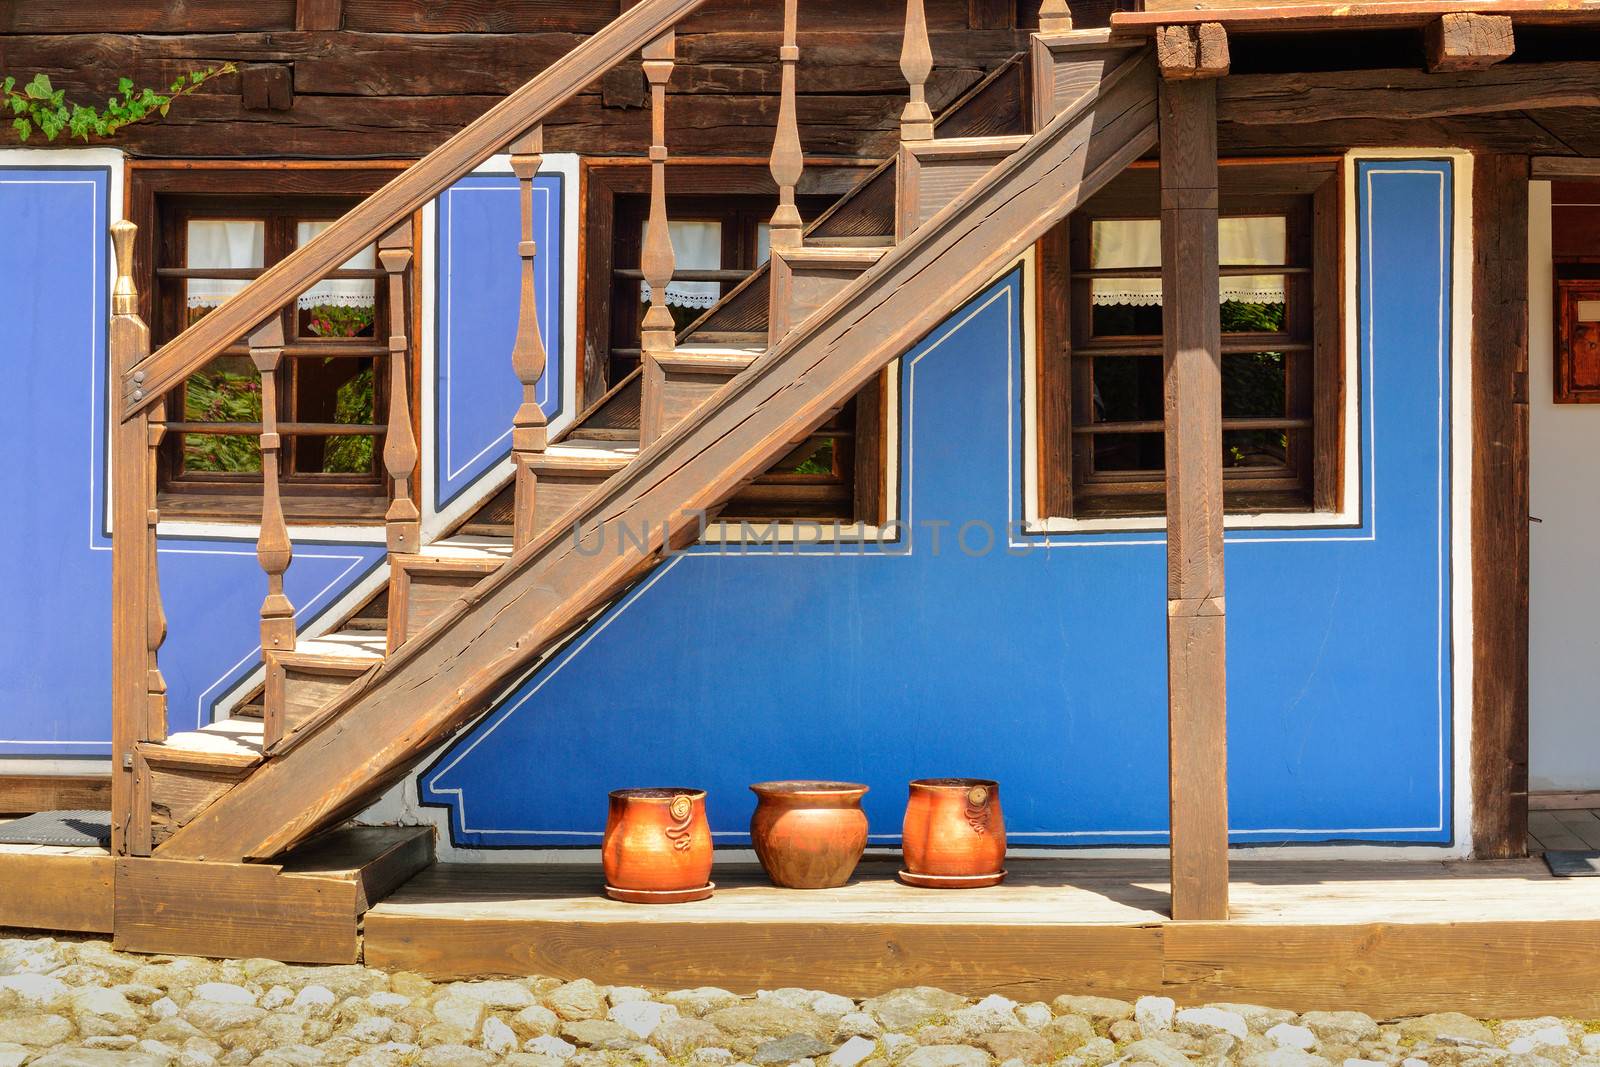 Wooden stairs and an old house in Koprivshtitsa Bulgaria, from t by velislava